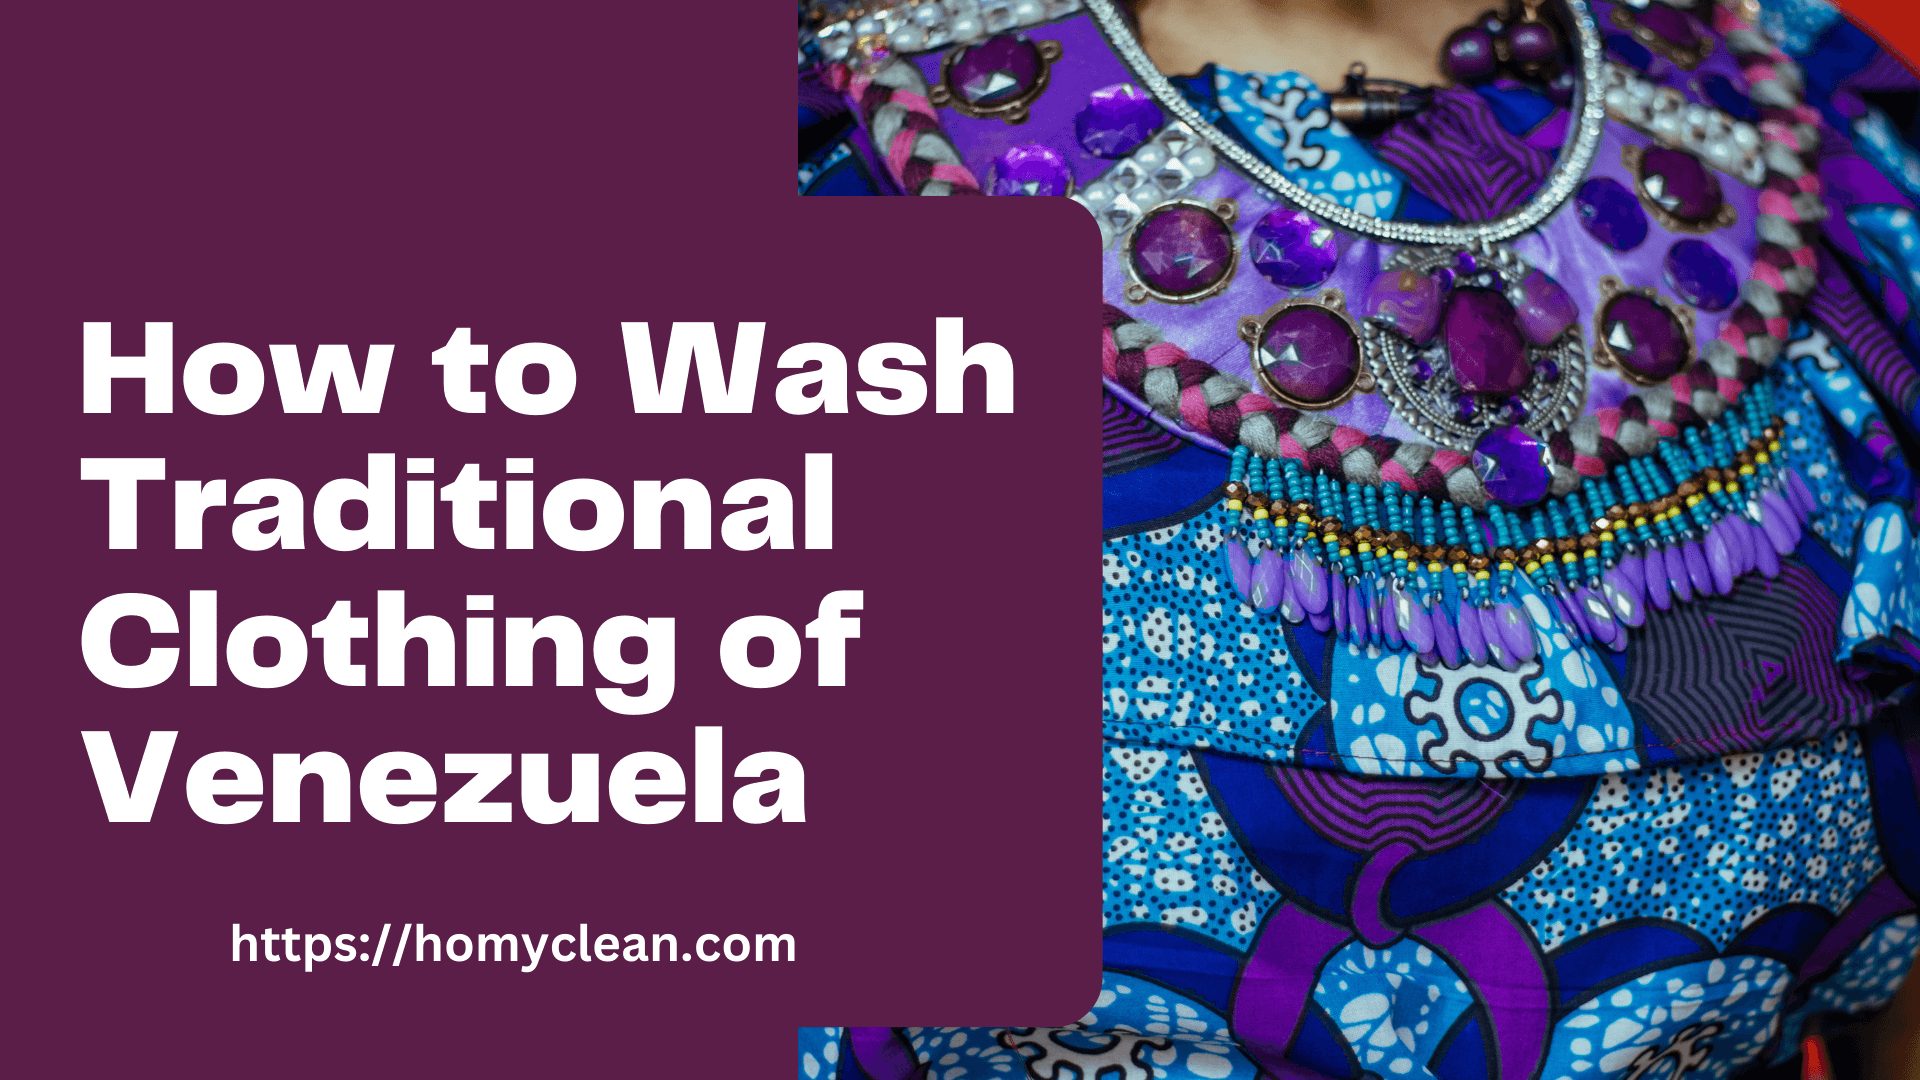 How to Wash Traditional Clothing of Venezuela